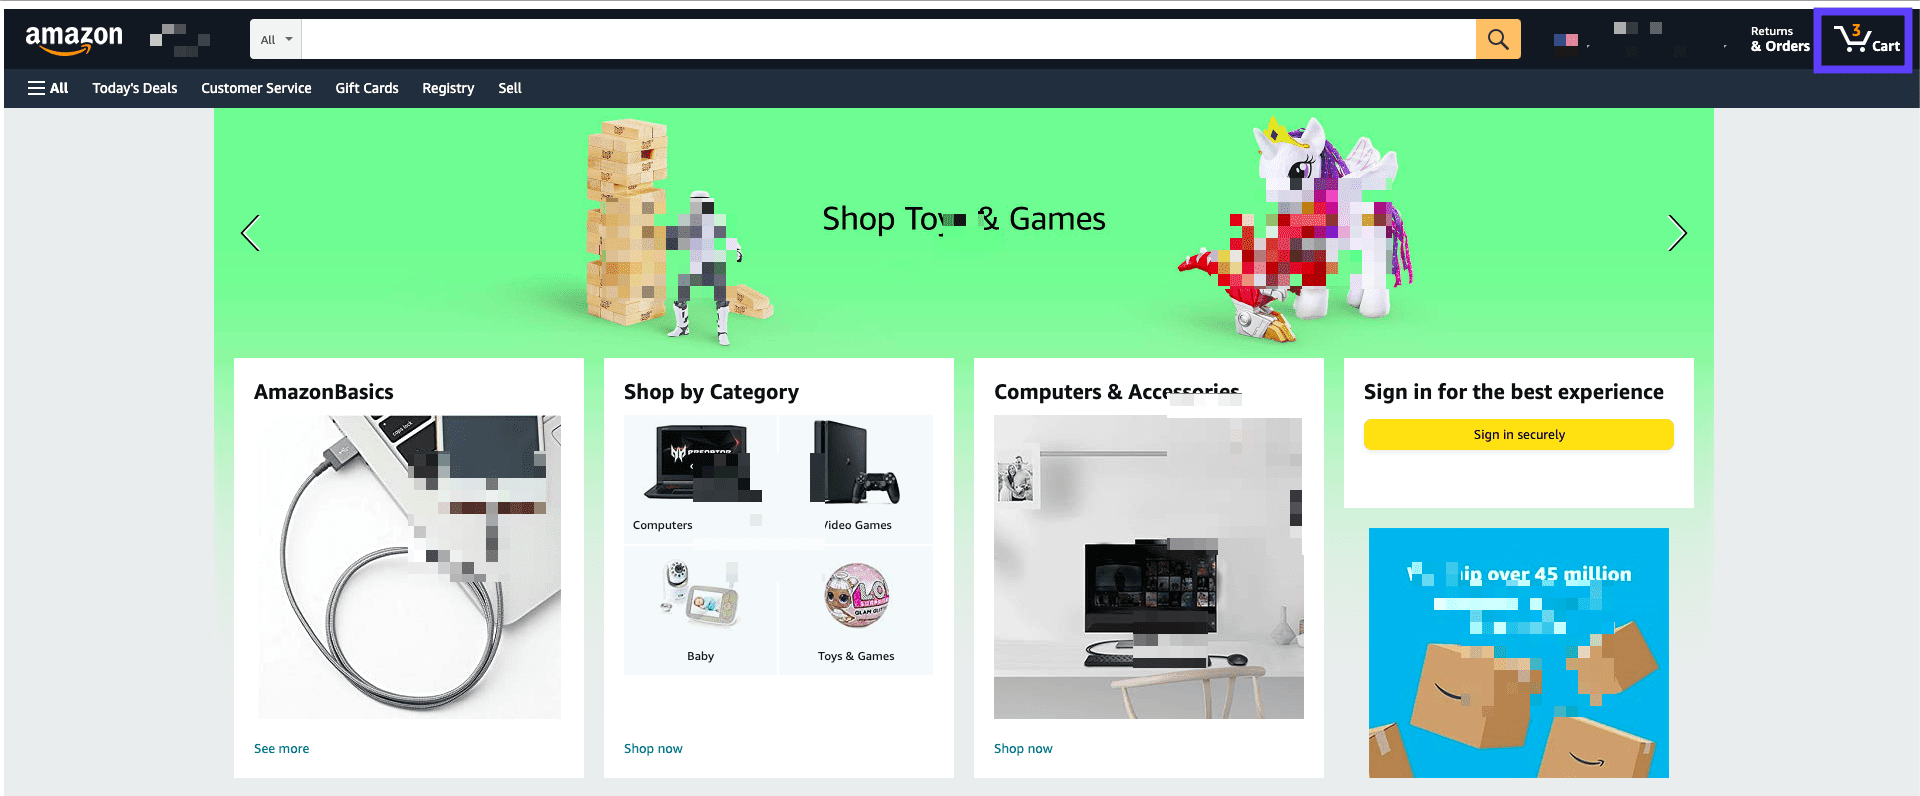 WooCommerce store displays the current status of a user’s cart